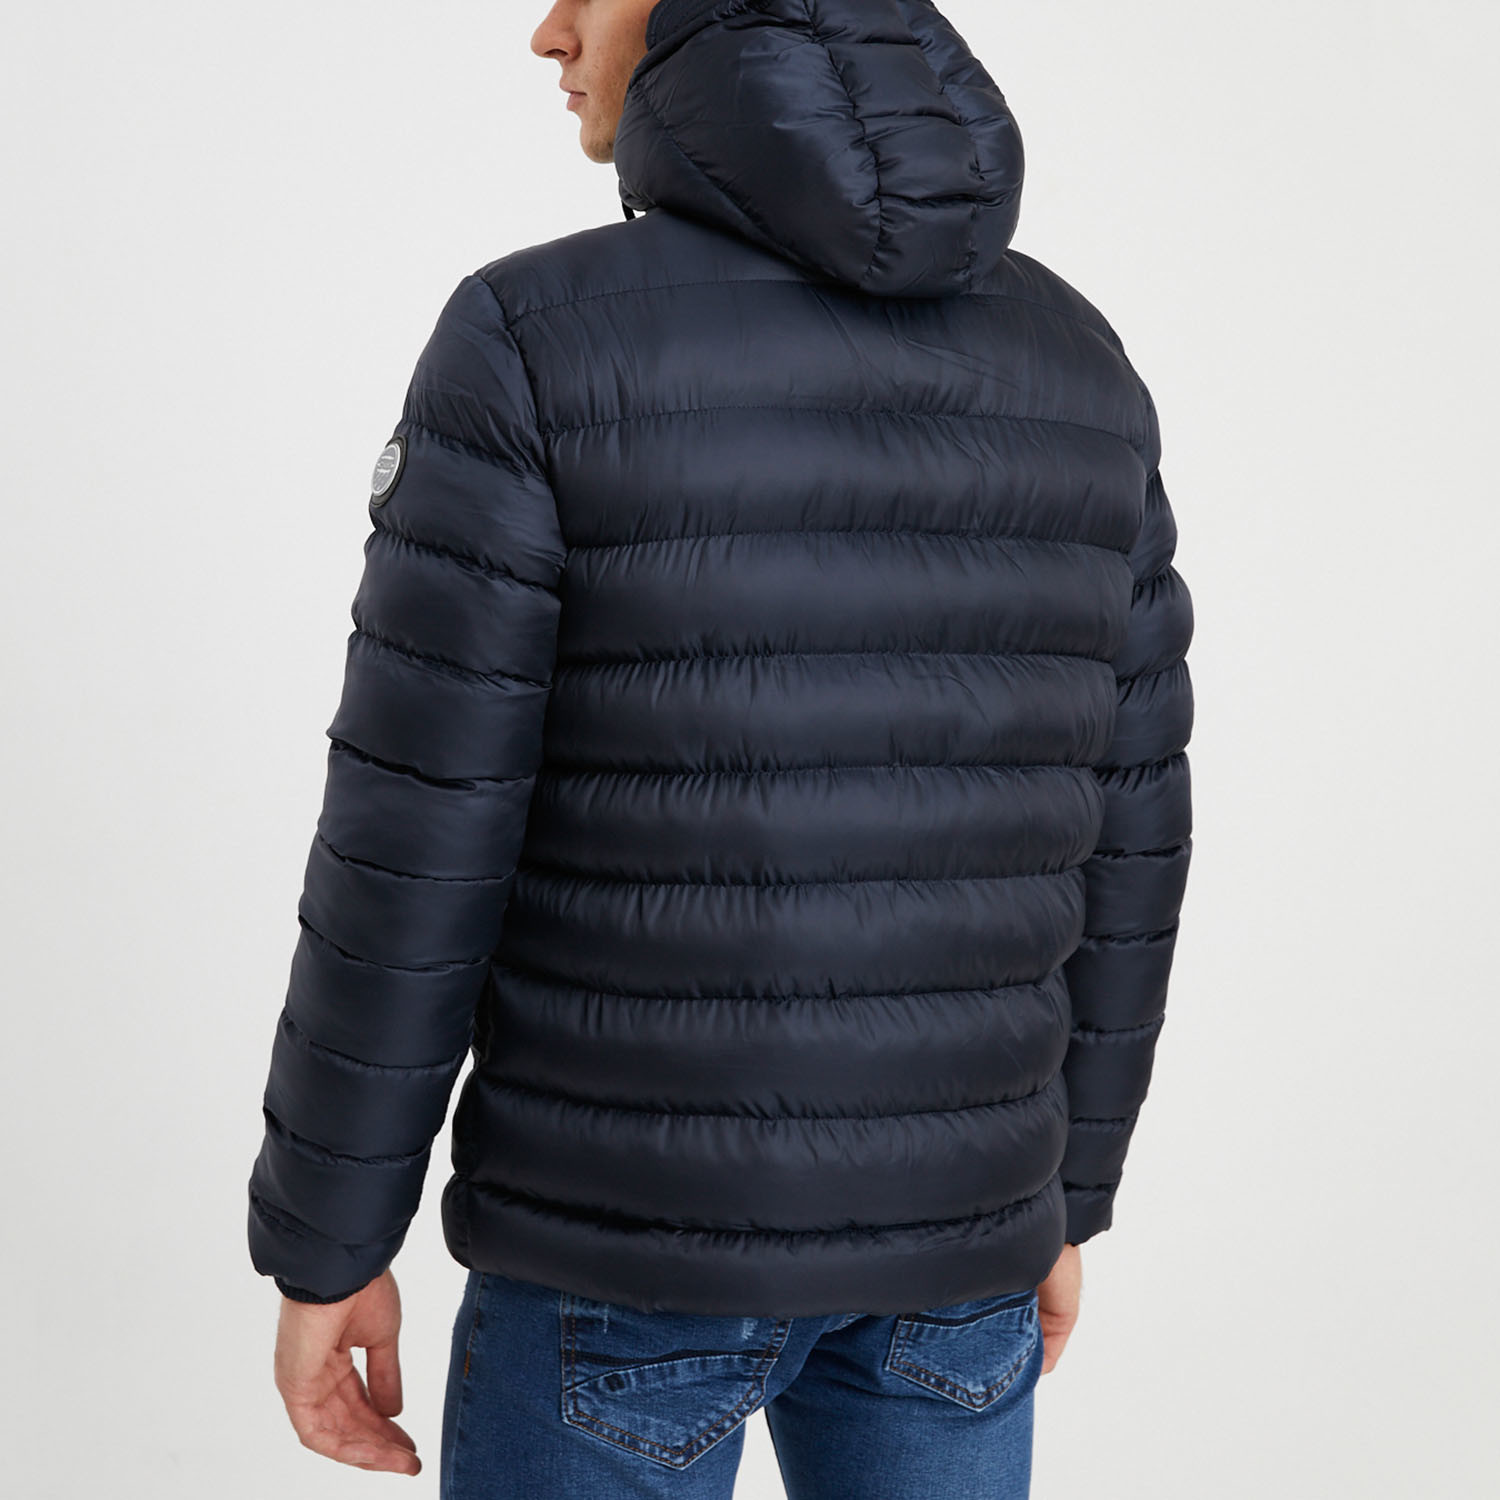 Tahoe Puff Jacket // Navy Blue (2XL) - Clearance: Clothing, Shoes ...